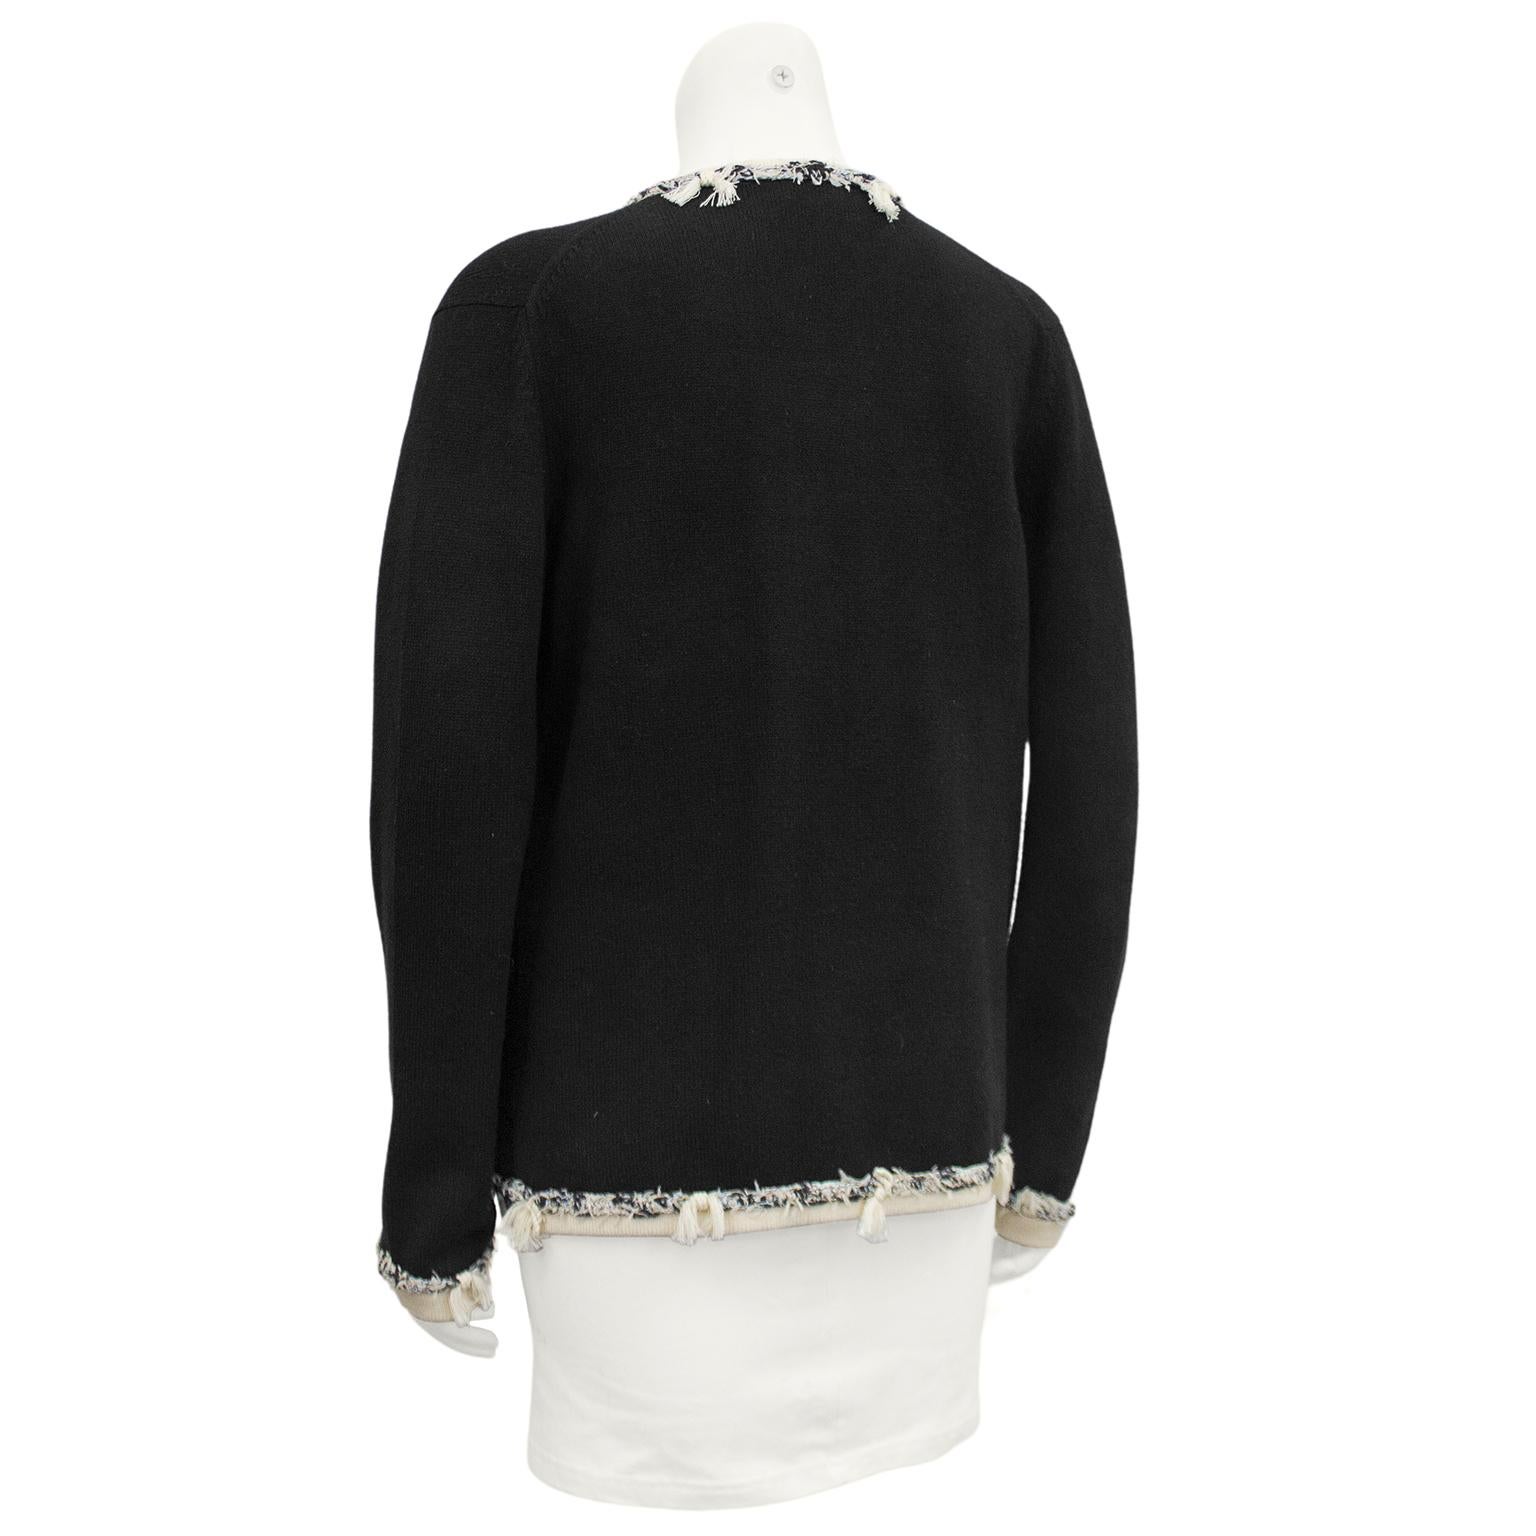 Chanel black 100% cashmere open front cardigan from 2005. Contrasting cream trim with black, white and cream deconstructed tweed fringe trim. Excellent vintage condition. Marked FR size 46, fits like a US size 8. Made in the United Kingdom. 